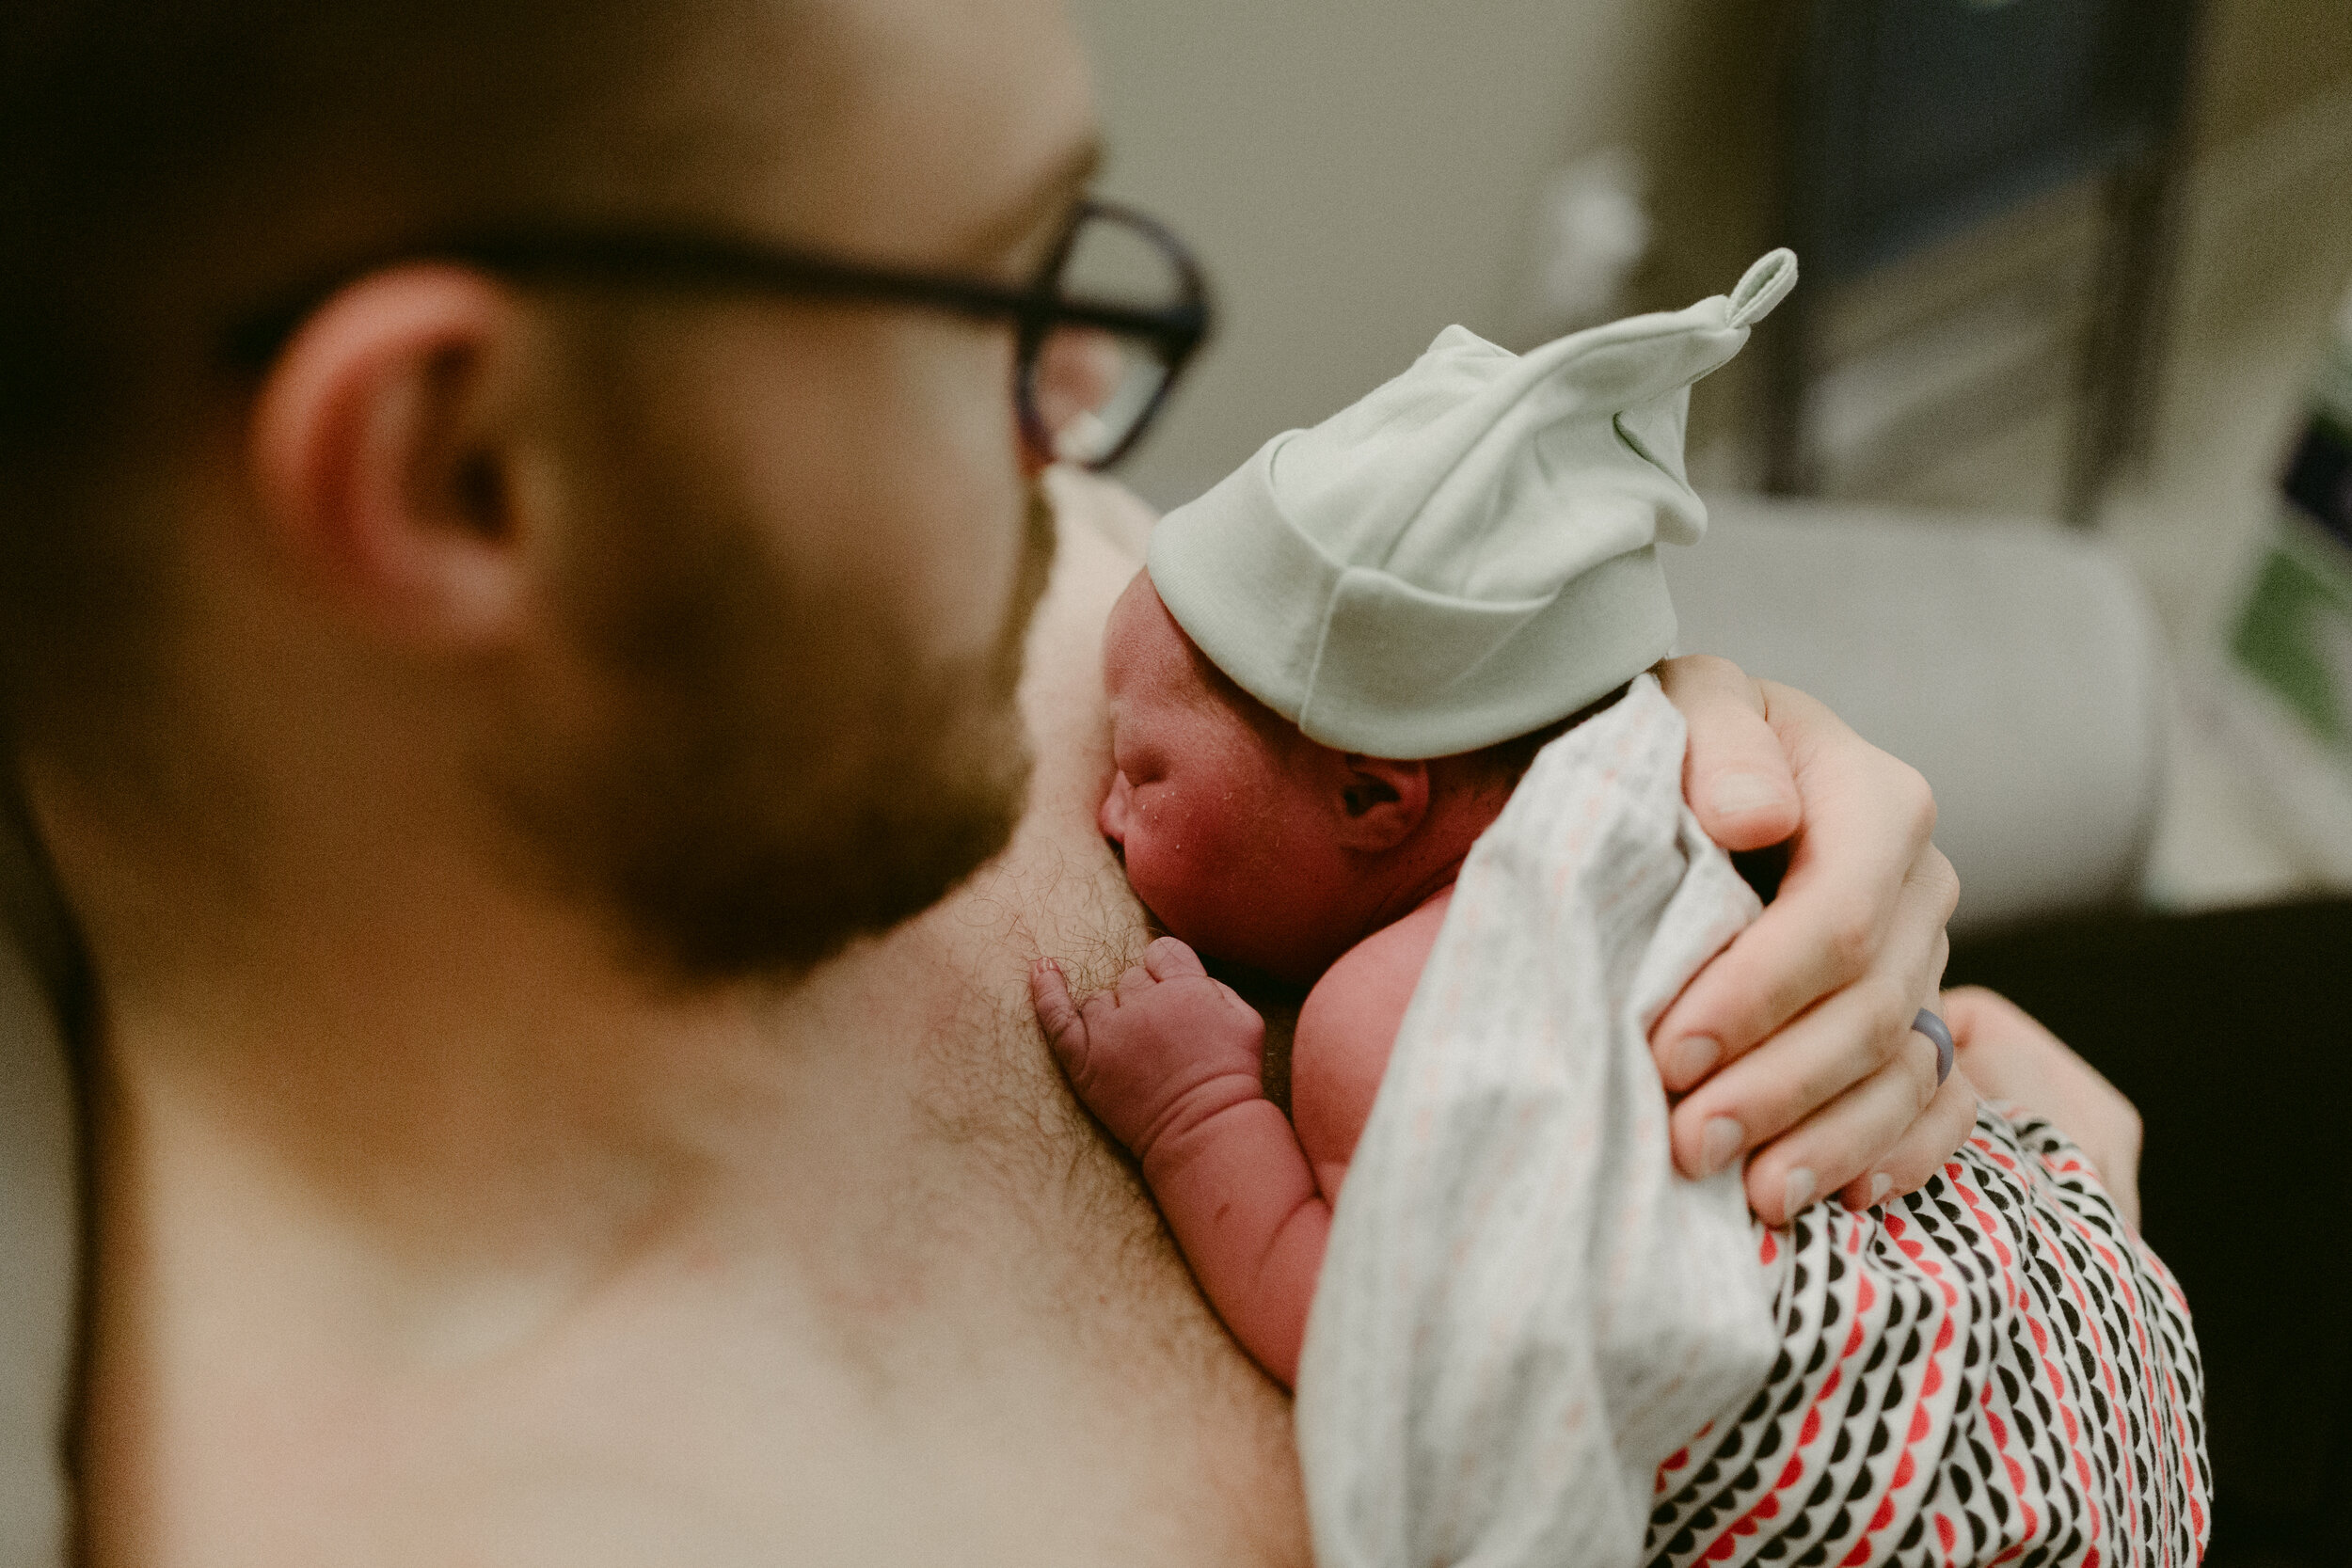 A father holds his newborn baby against his chest at a home birth.